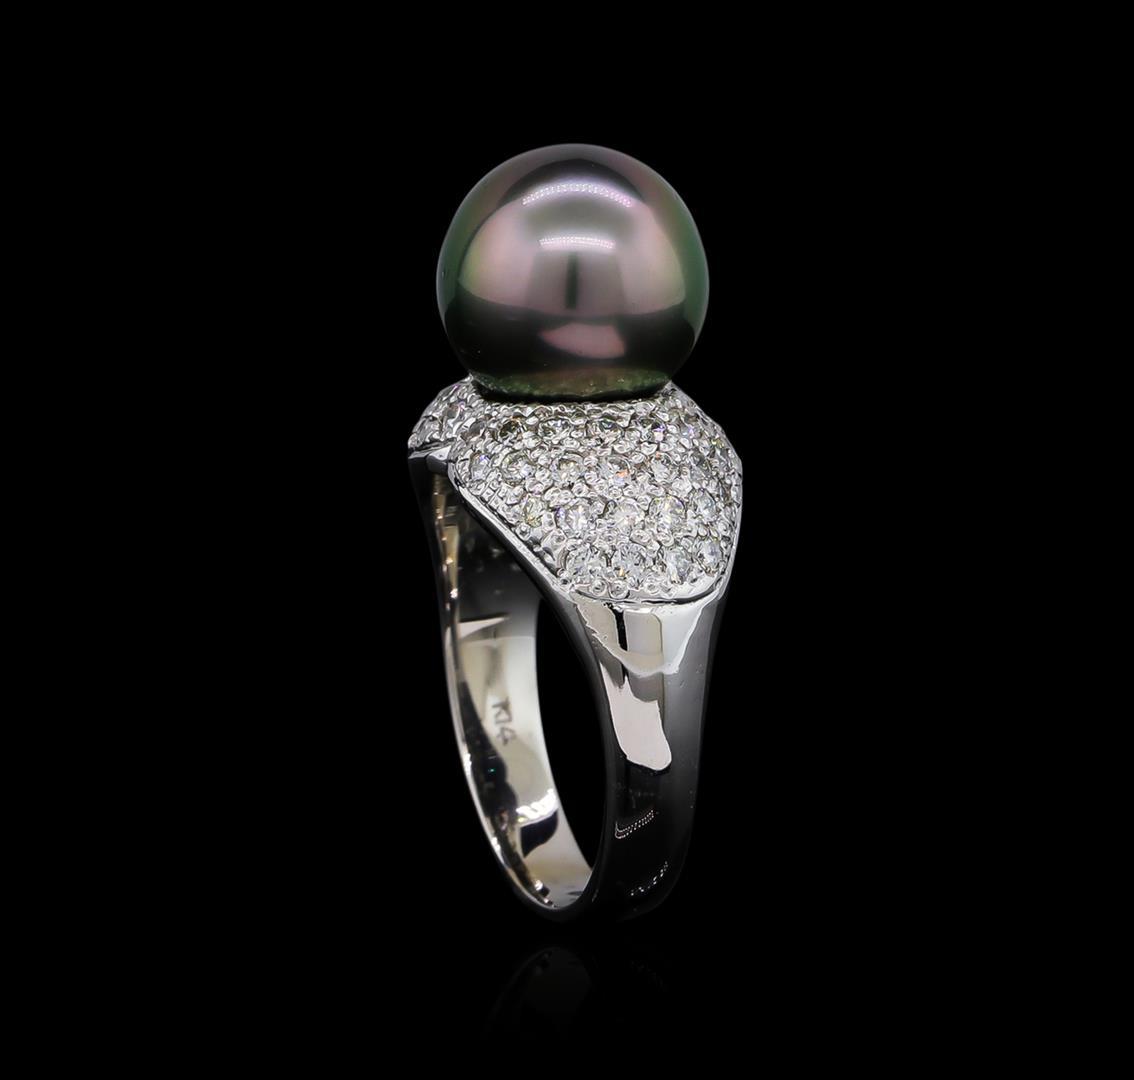 0.87 ctw Pearl and Diamond Ring - 14KT White Gold